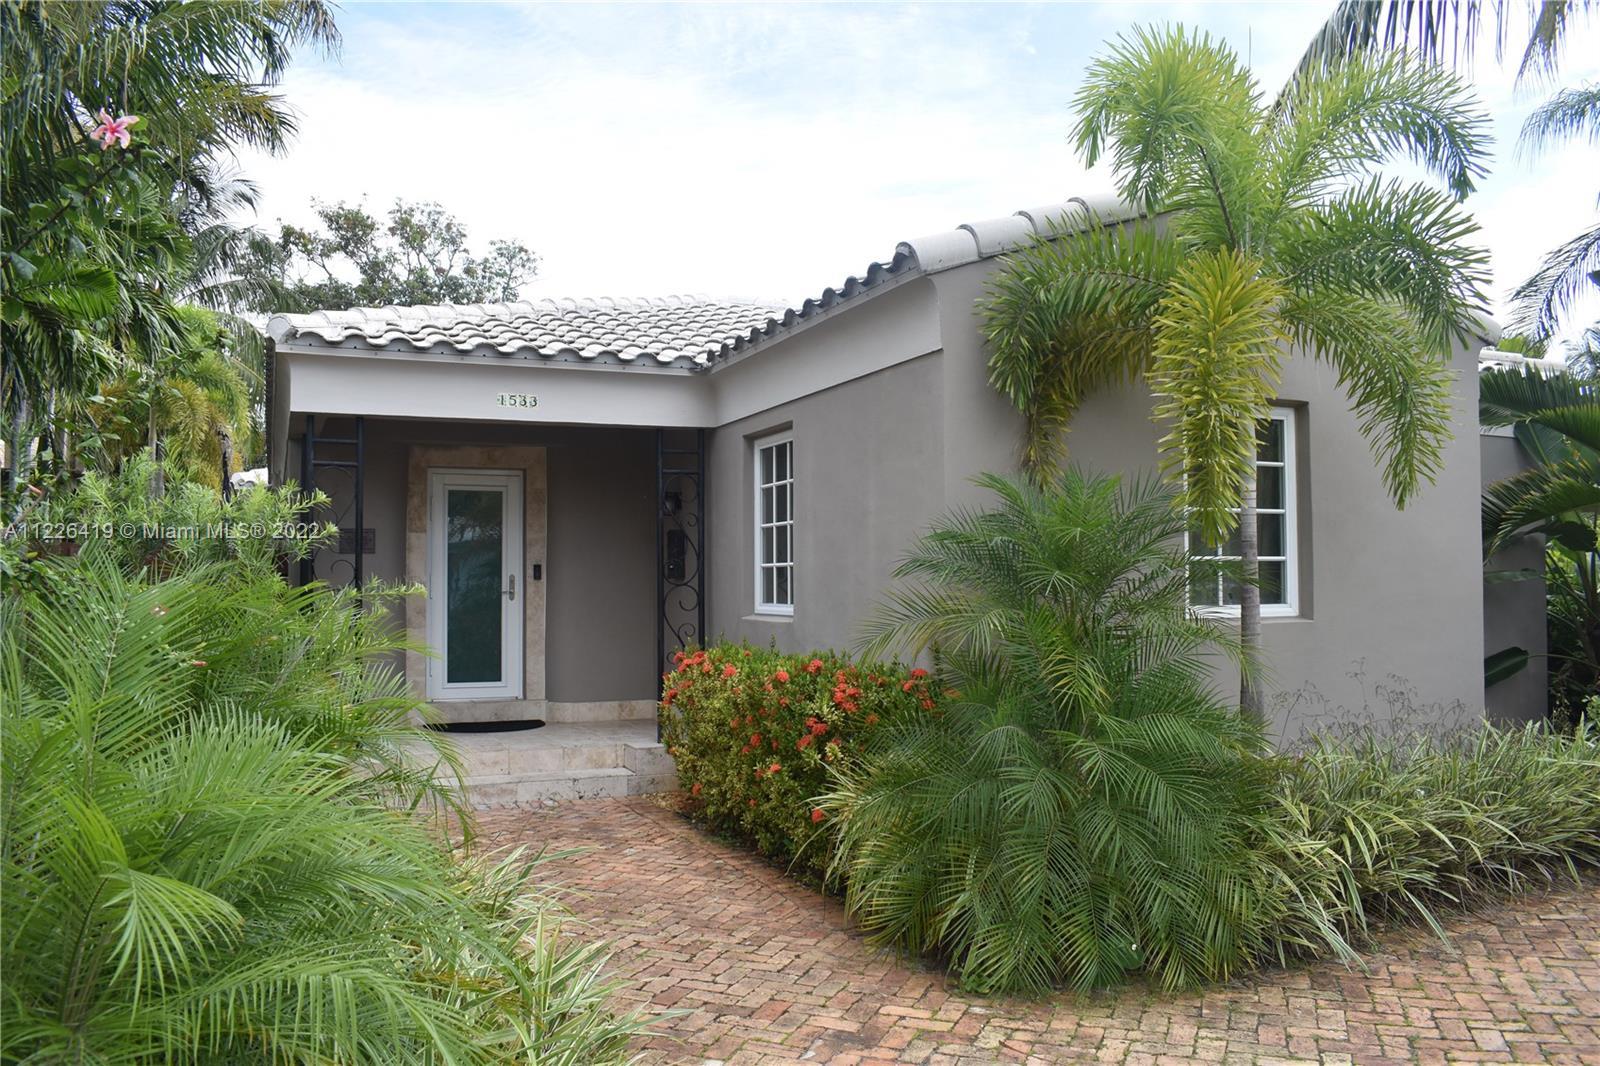 Check out this lovely, well kept historic home in the heart of Hollywood Lakes within a mile to the 